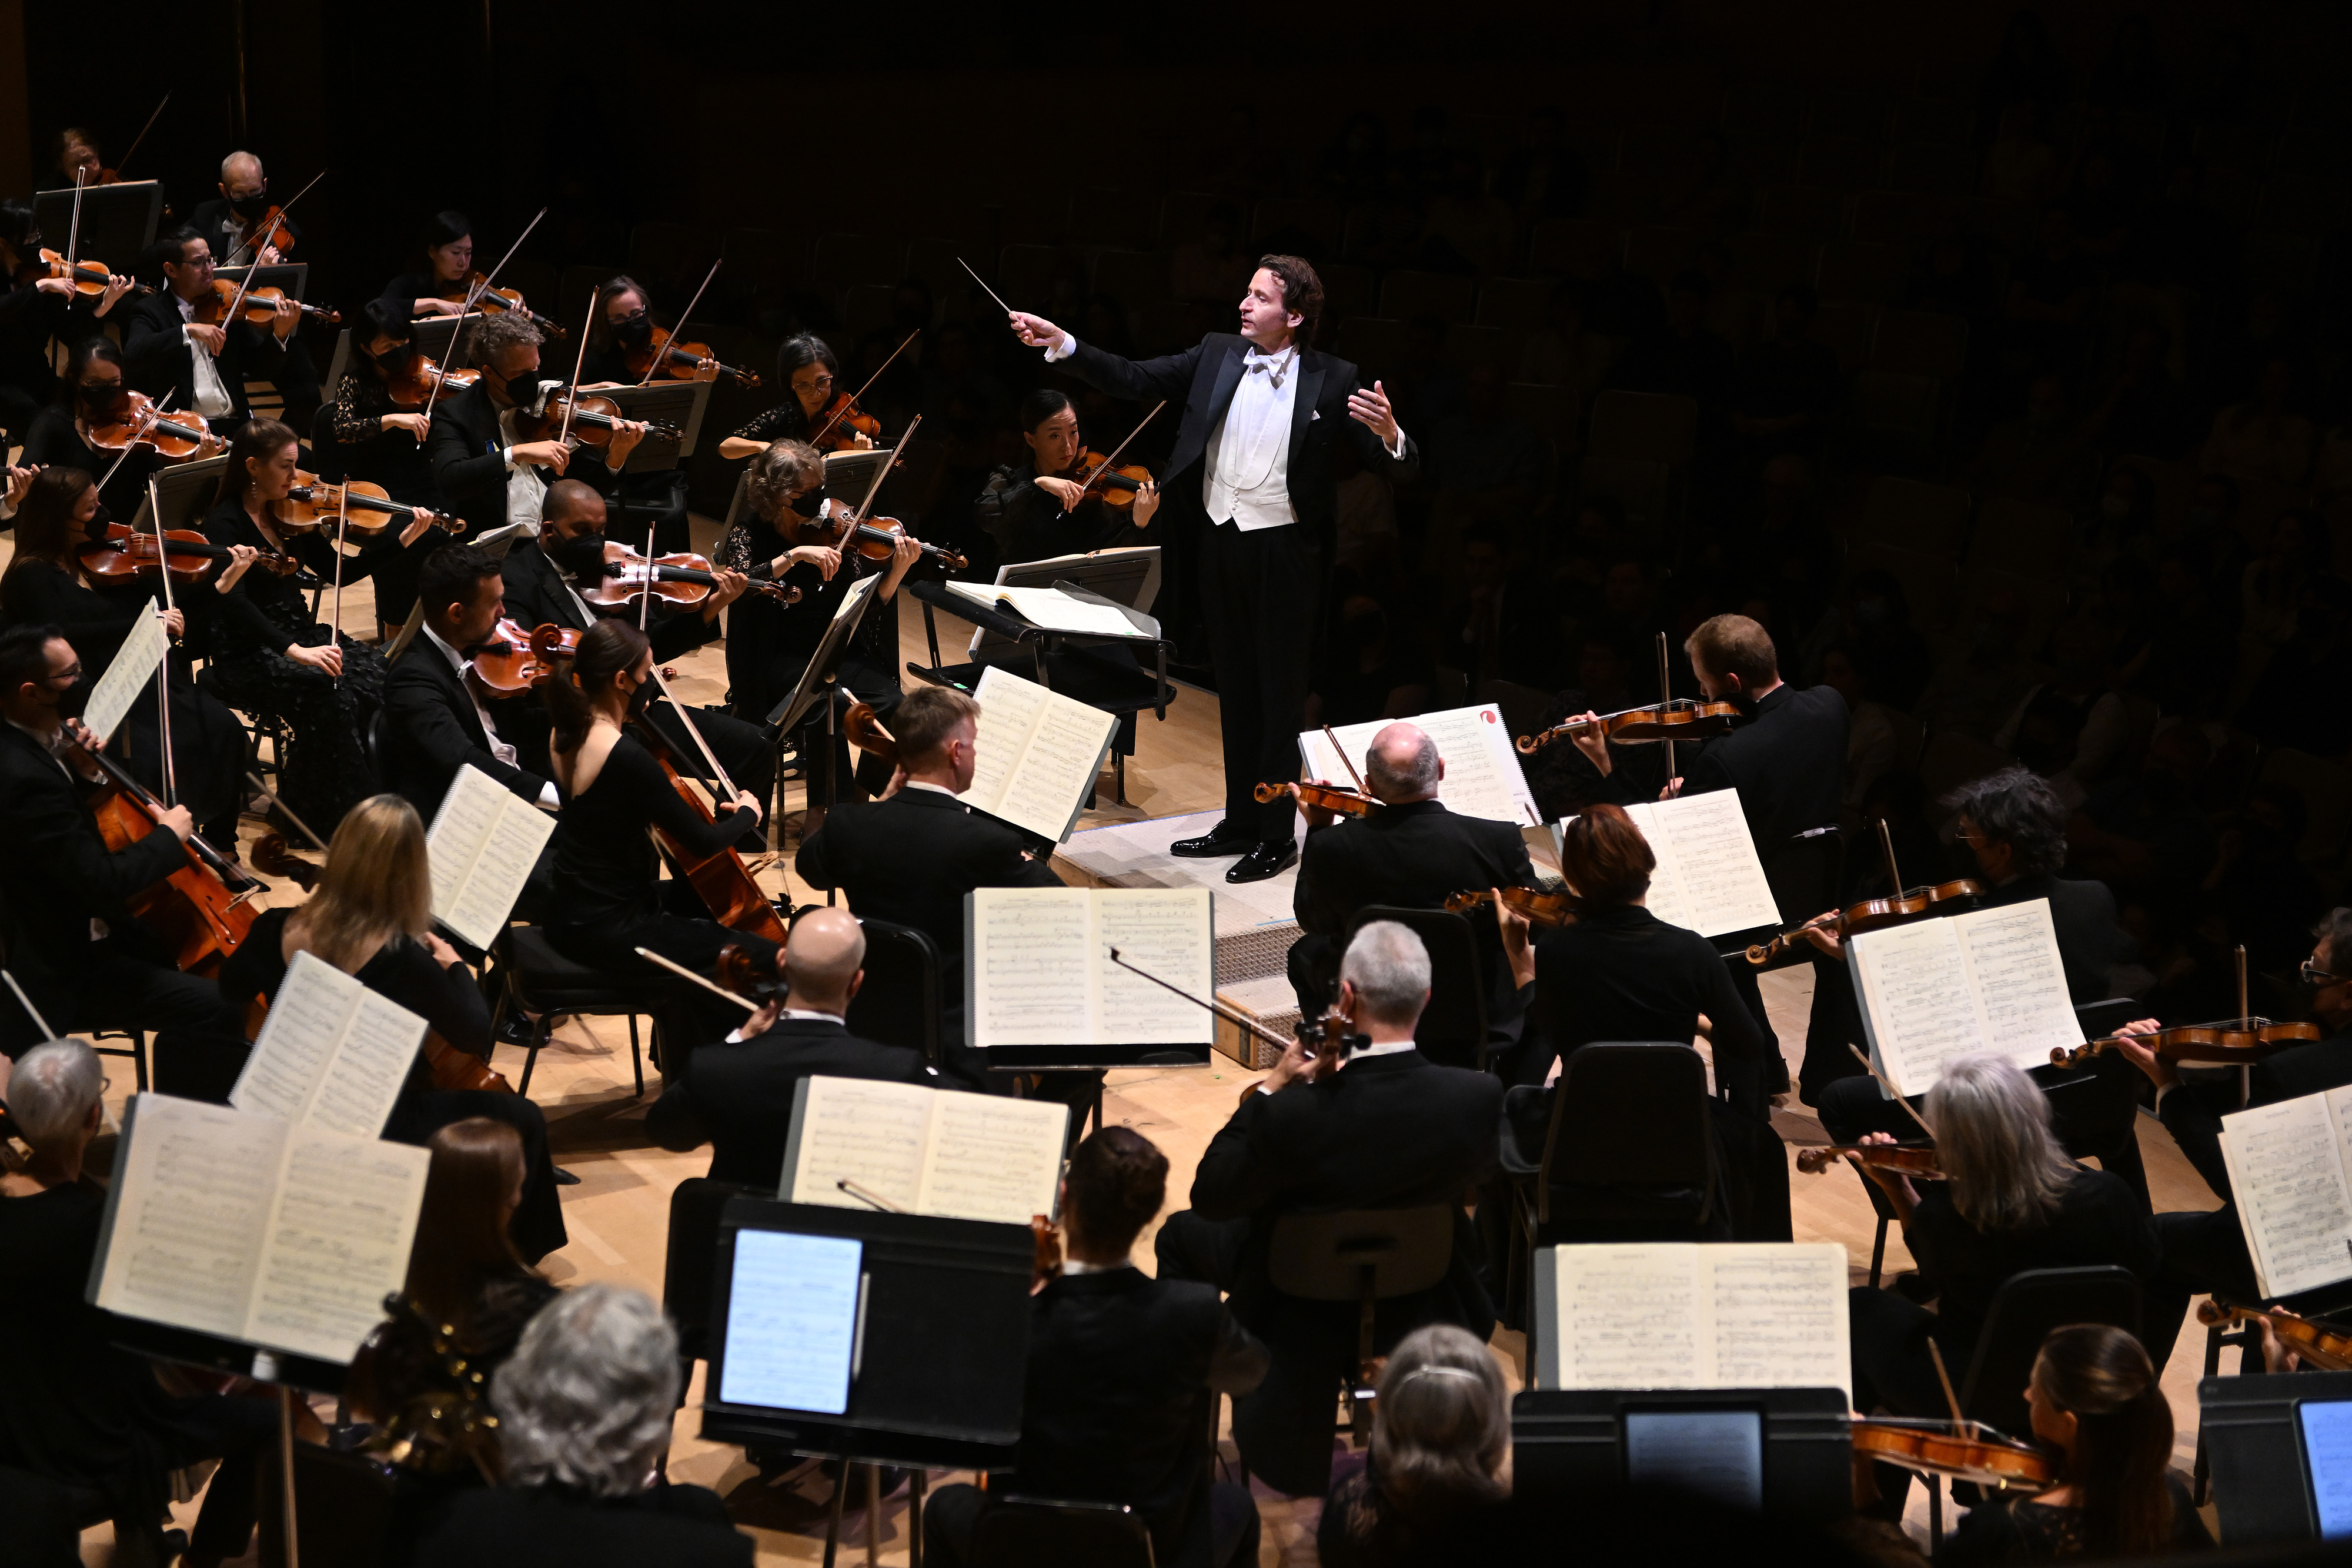 Toronto Symphony Orchestra Announces All-Access Open House, Free